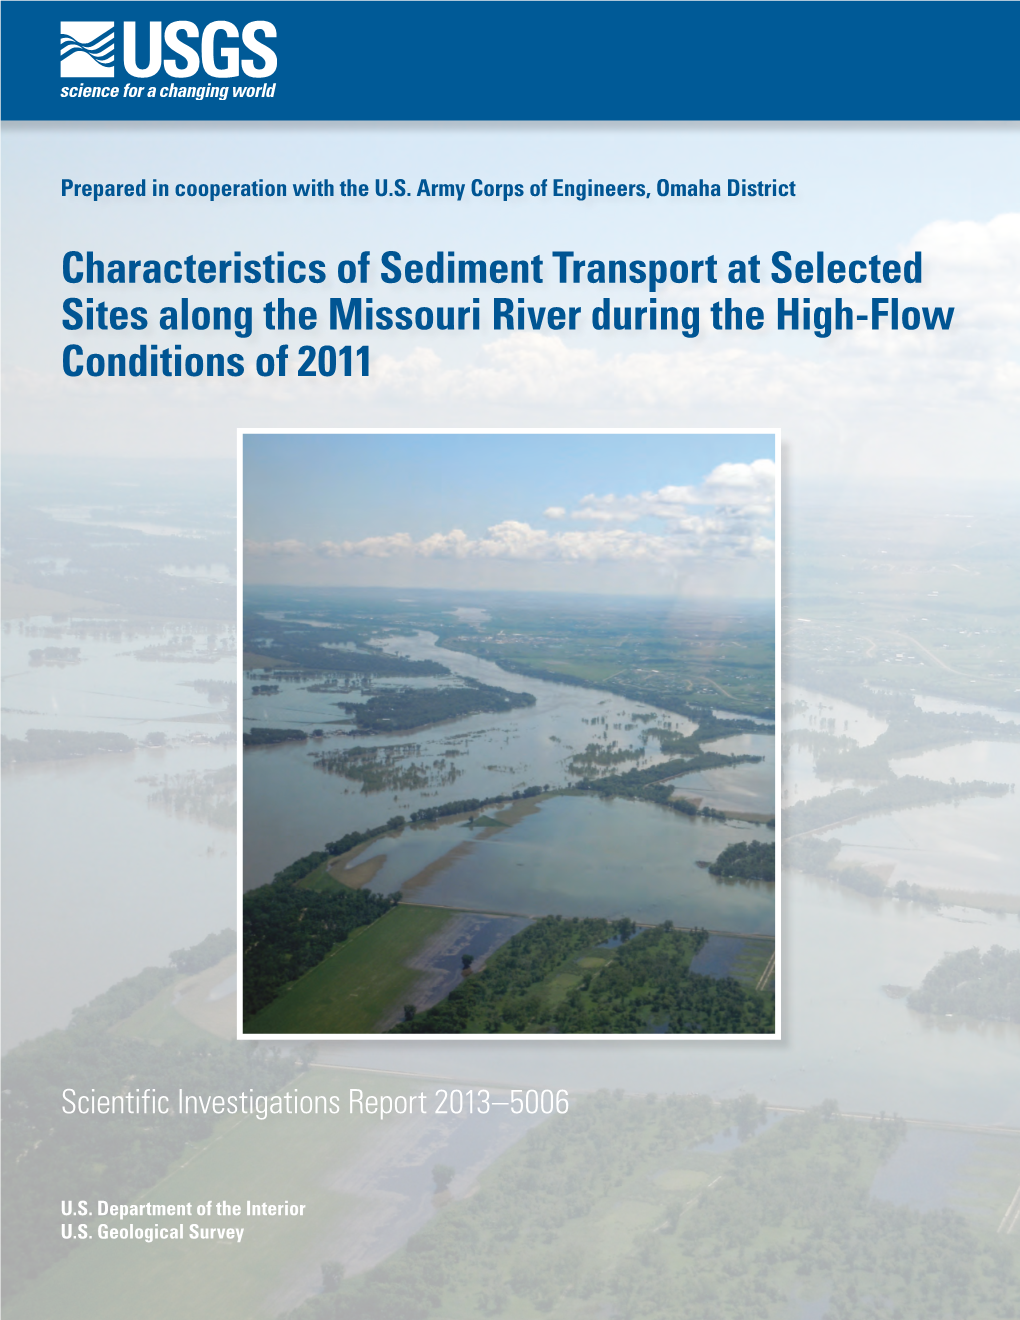 Characteristics of Sediment Transport at Selected Sites Along the Missouri River During the High-Flow Conditions of 2011